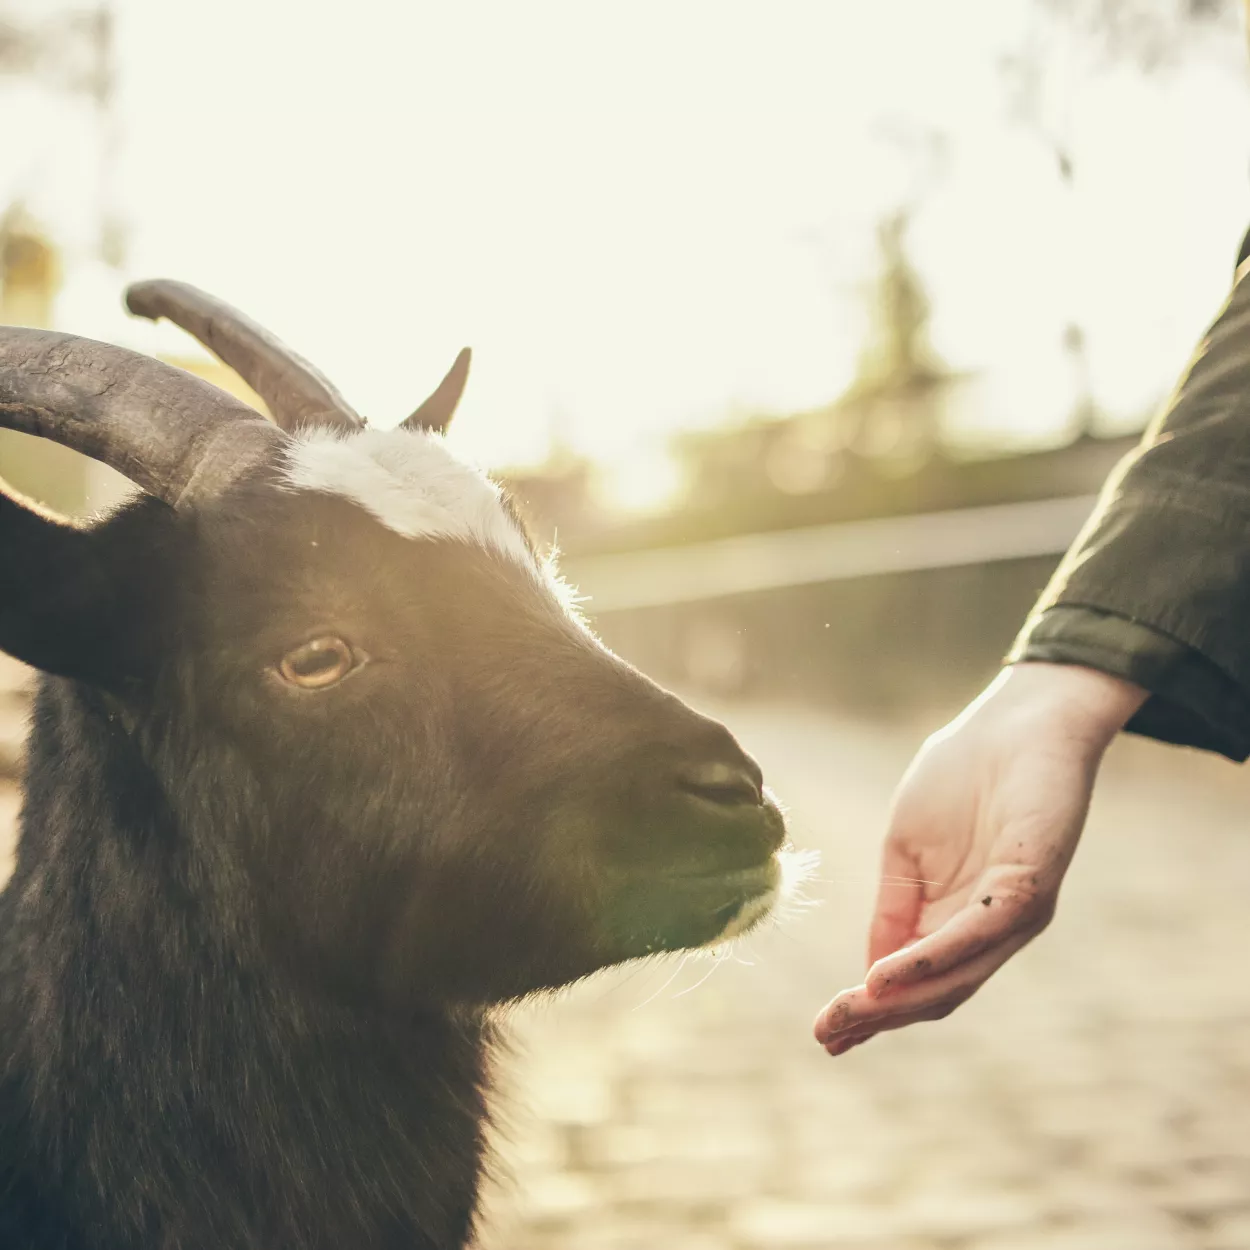 a hand is held out towards a goat